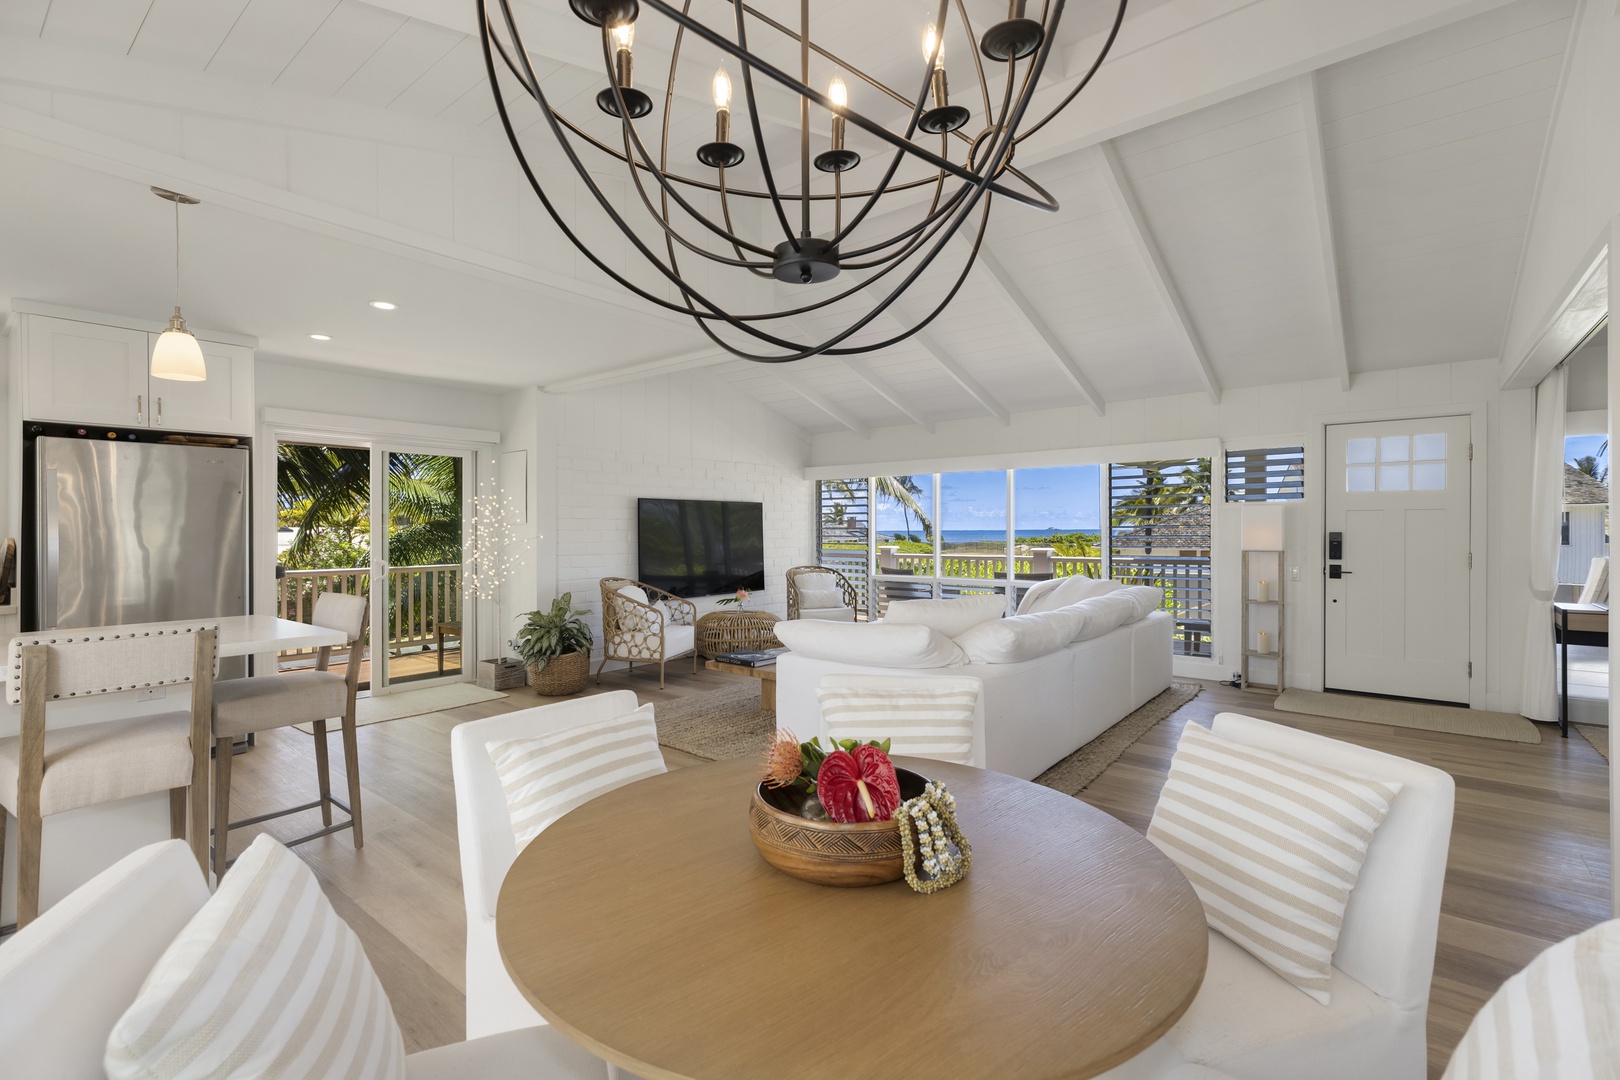 Kailua Vacation Rentals, Ranch Beach Estate - Sleek and contemporary living space for ultimate relaxation.